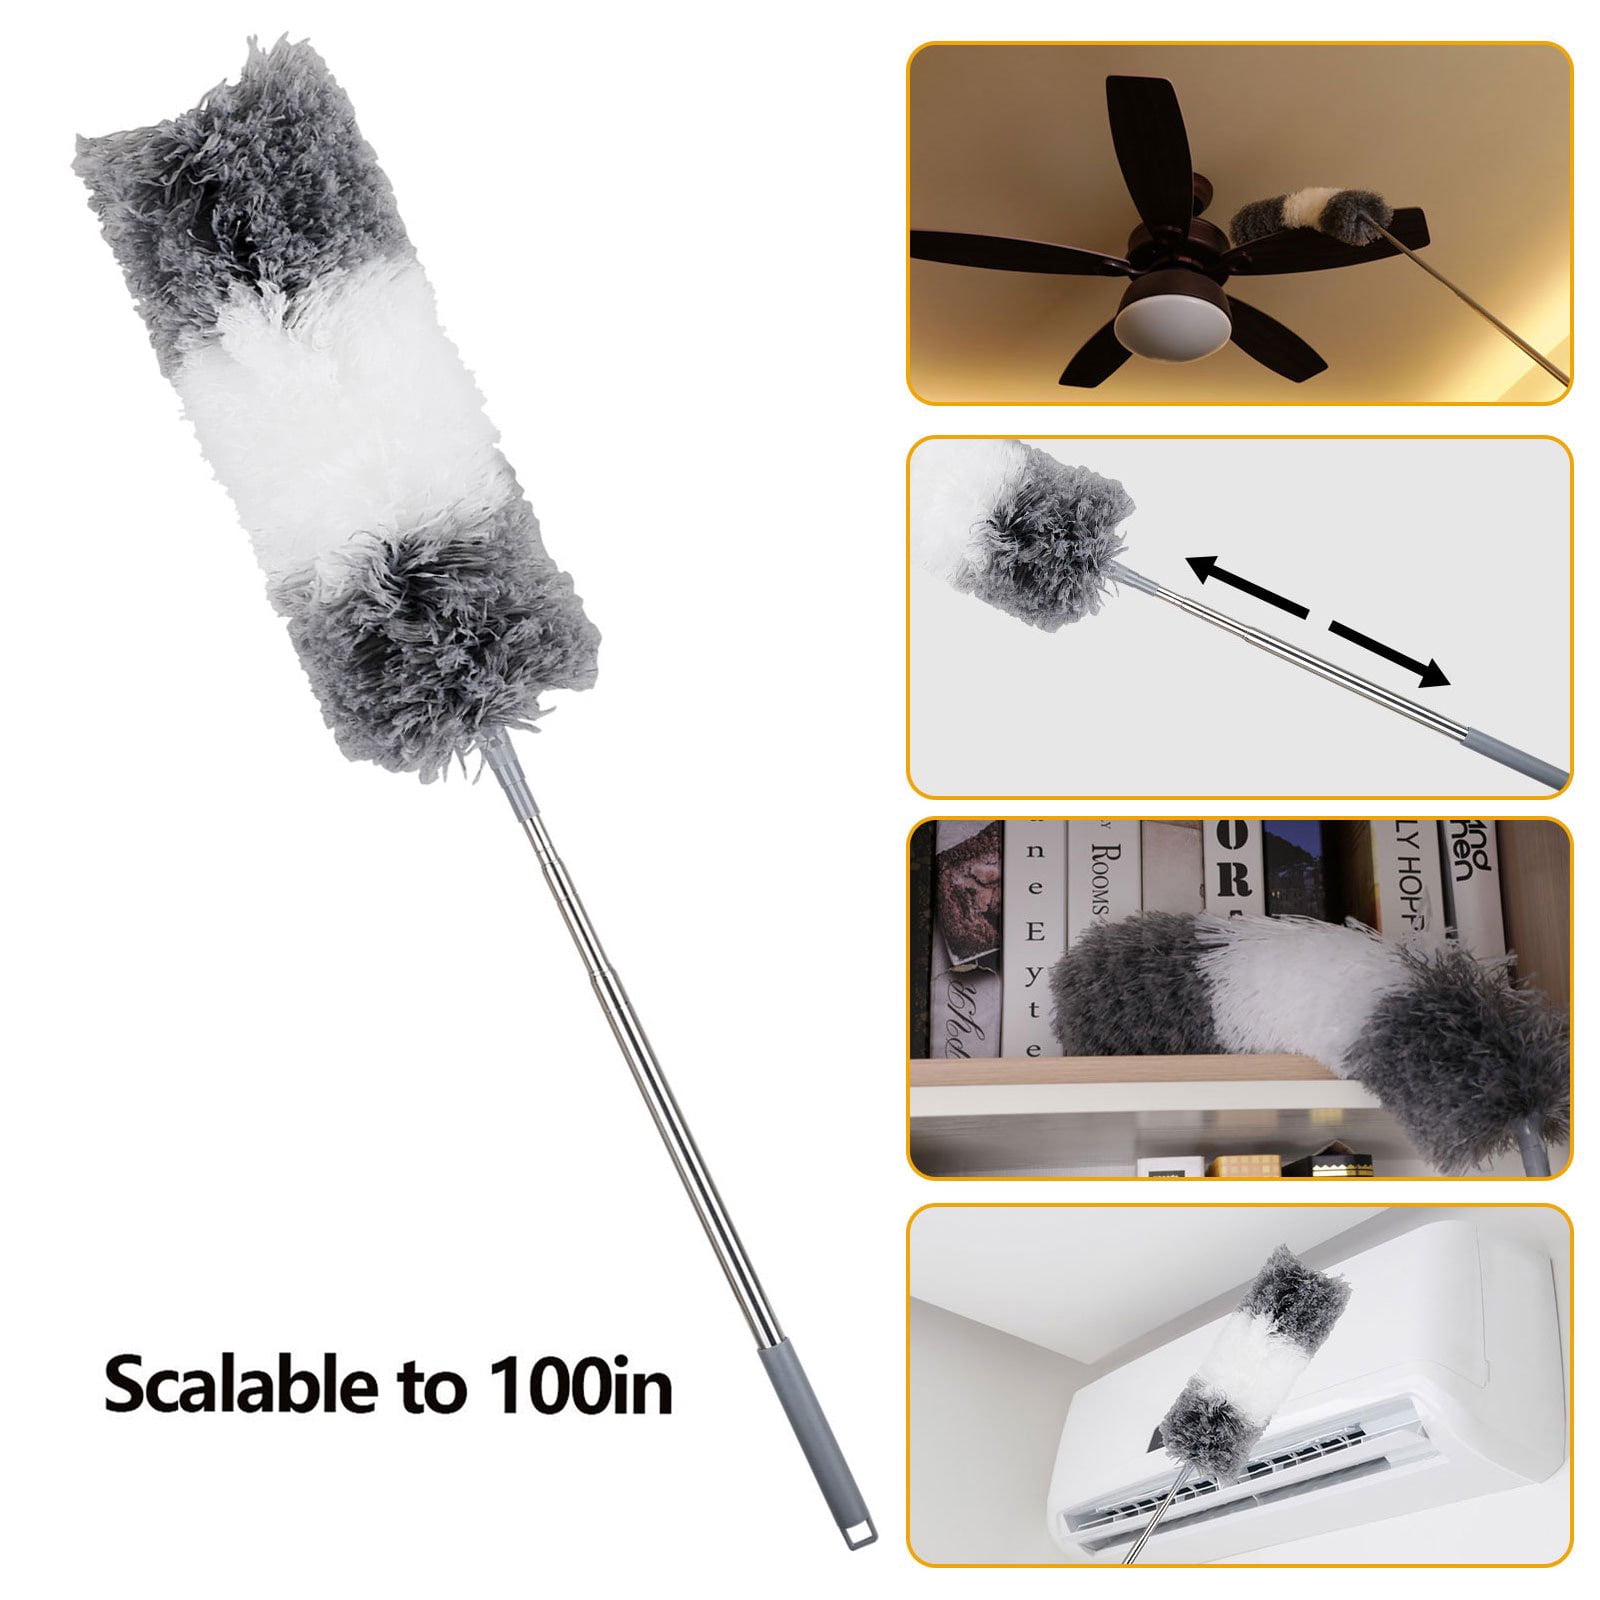 Ceiling Fan Duster with Extension Pole, Cobweb & Corner Brush Cleaning Kit W 2 Duster Heads for Cleaning,15-100 inch Long Handle Aluminum